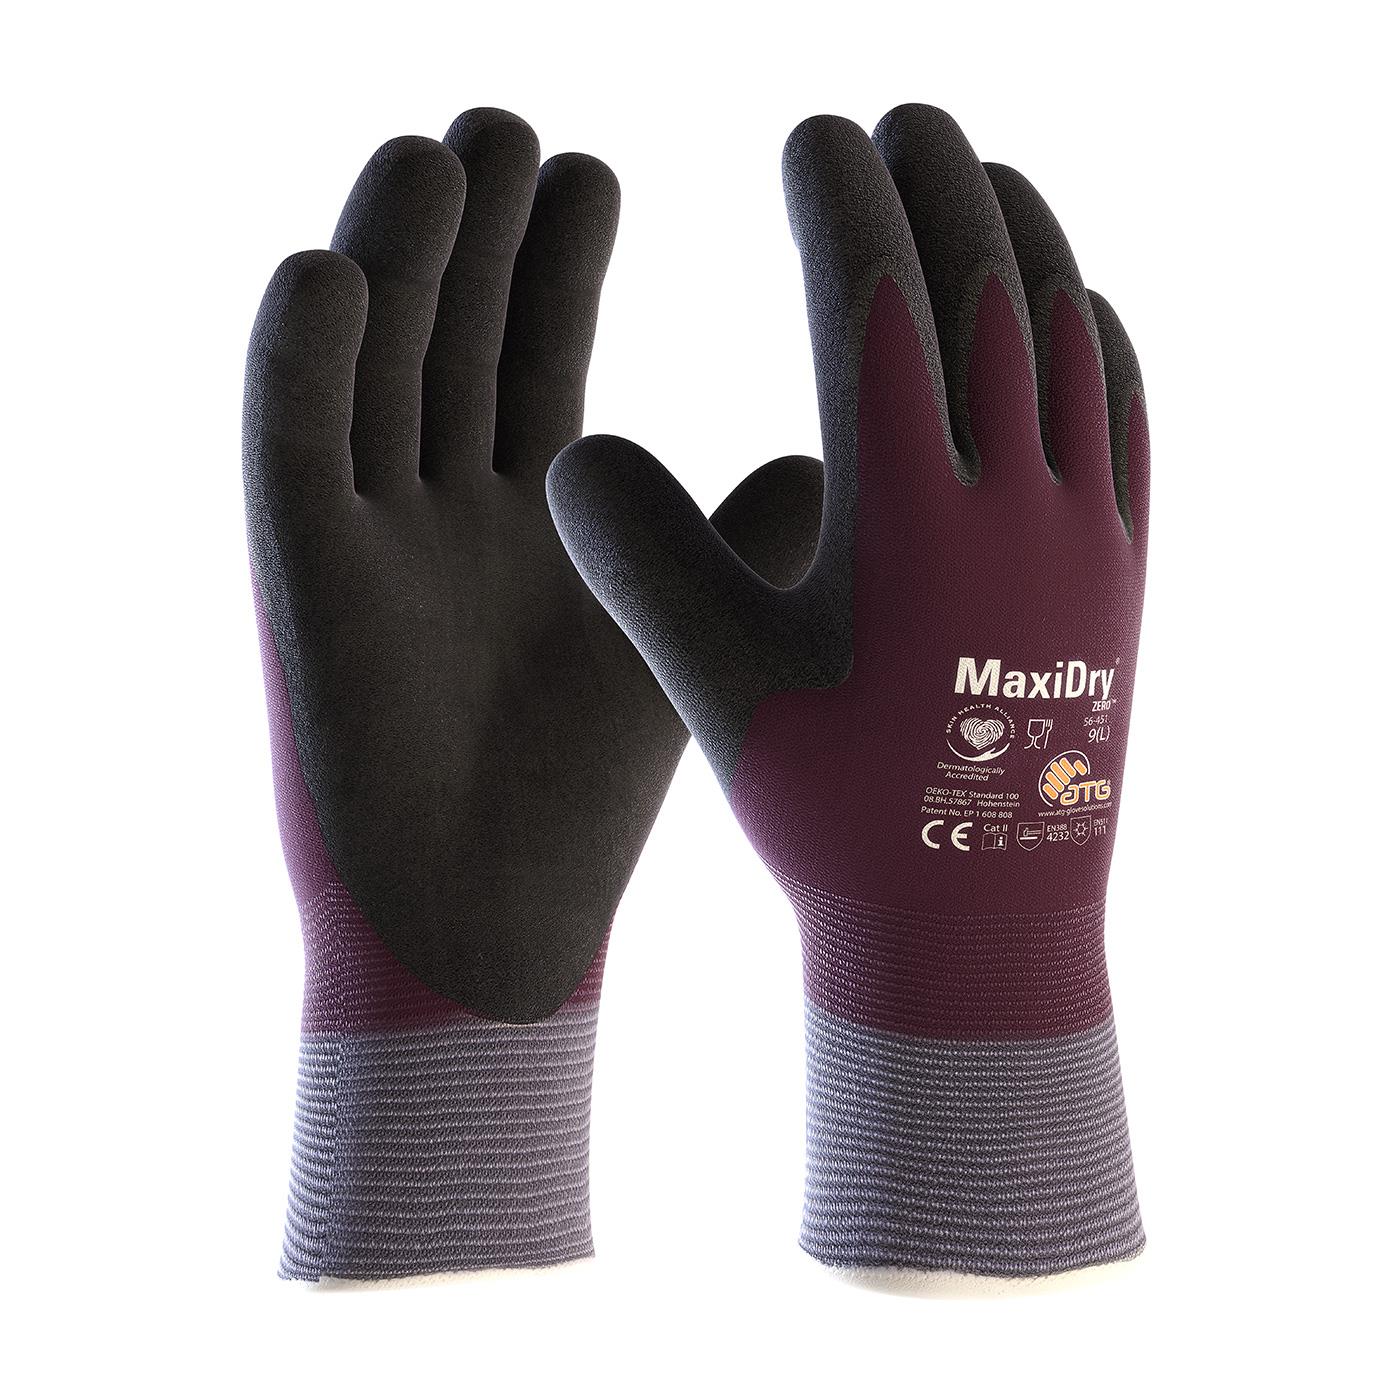 MAXIDRY ZERO DOUBLE DIPPED NITRILE - Cold-Resistant Gloves